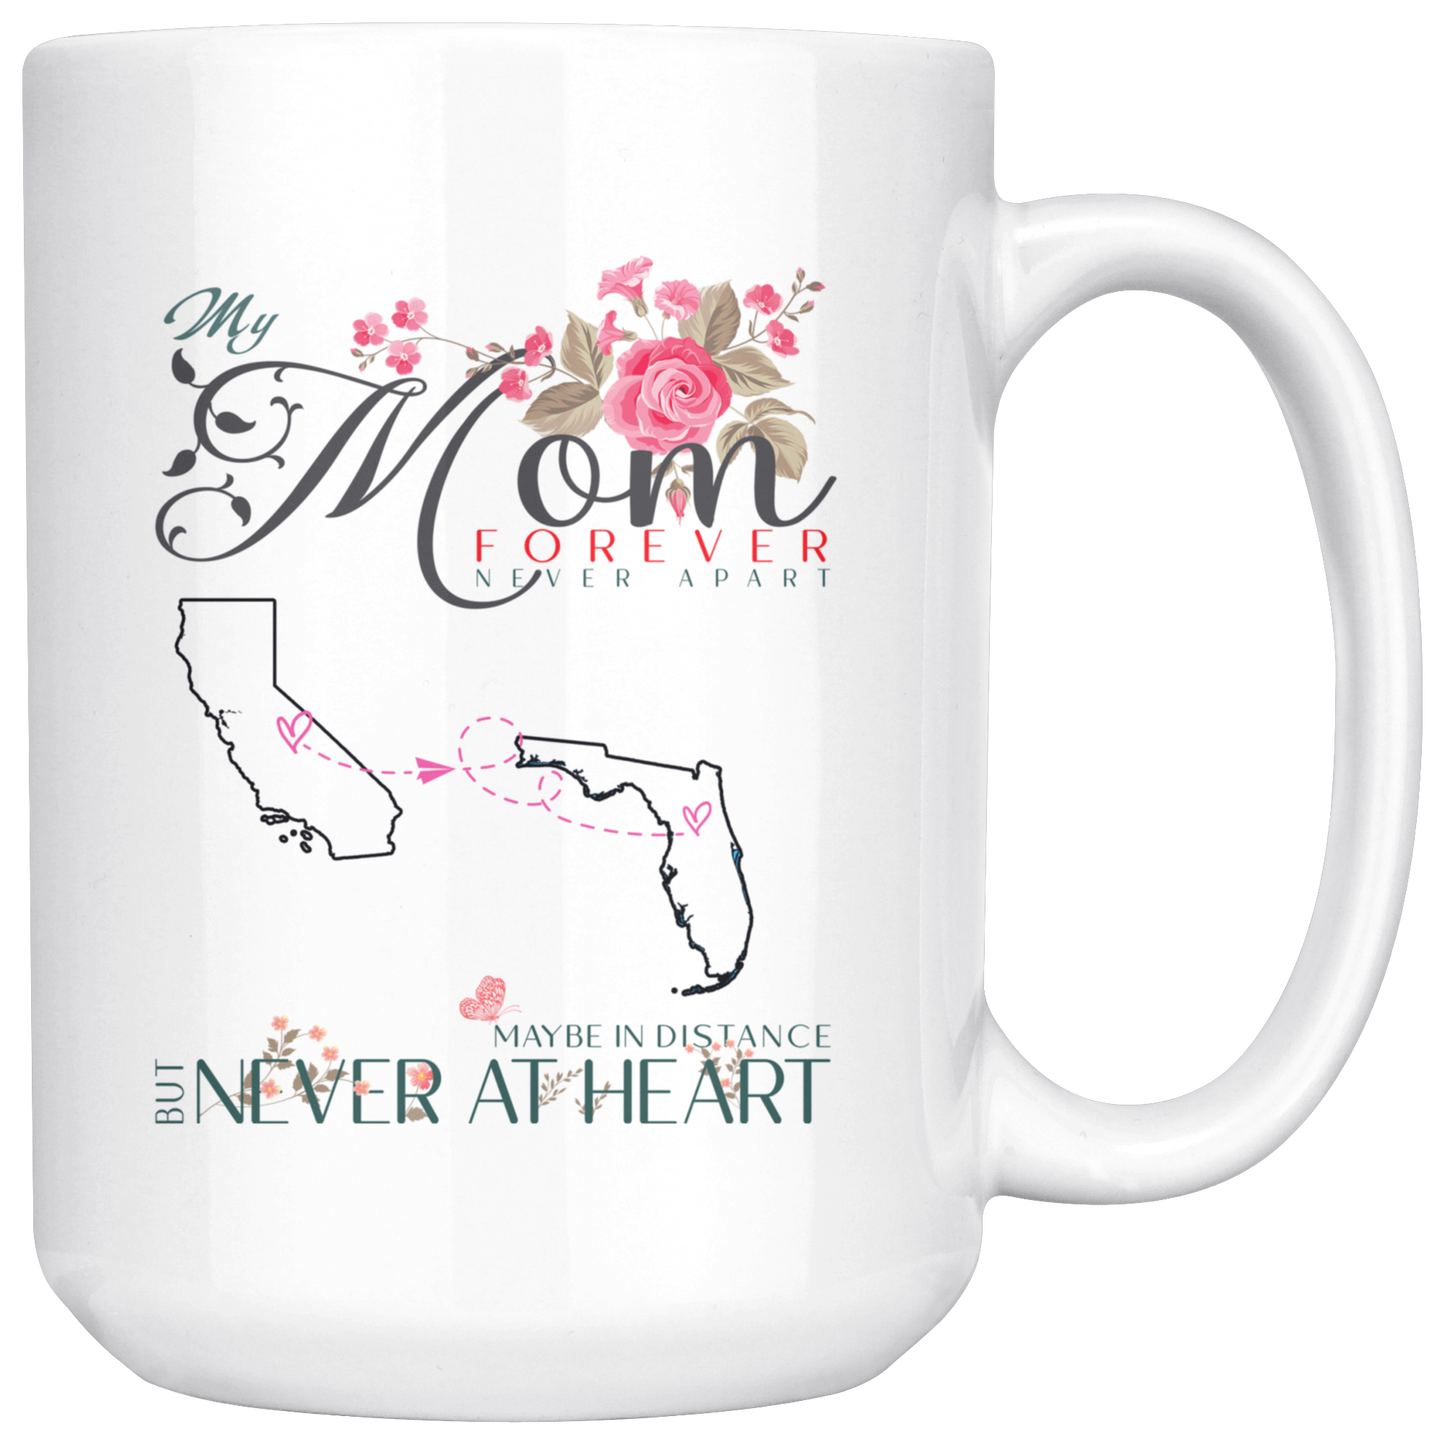 M-20321571-sp-23608 - [ California | Florida ]Personalized Mothers Day Coffee Mug - My Mom Forever Never A